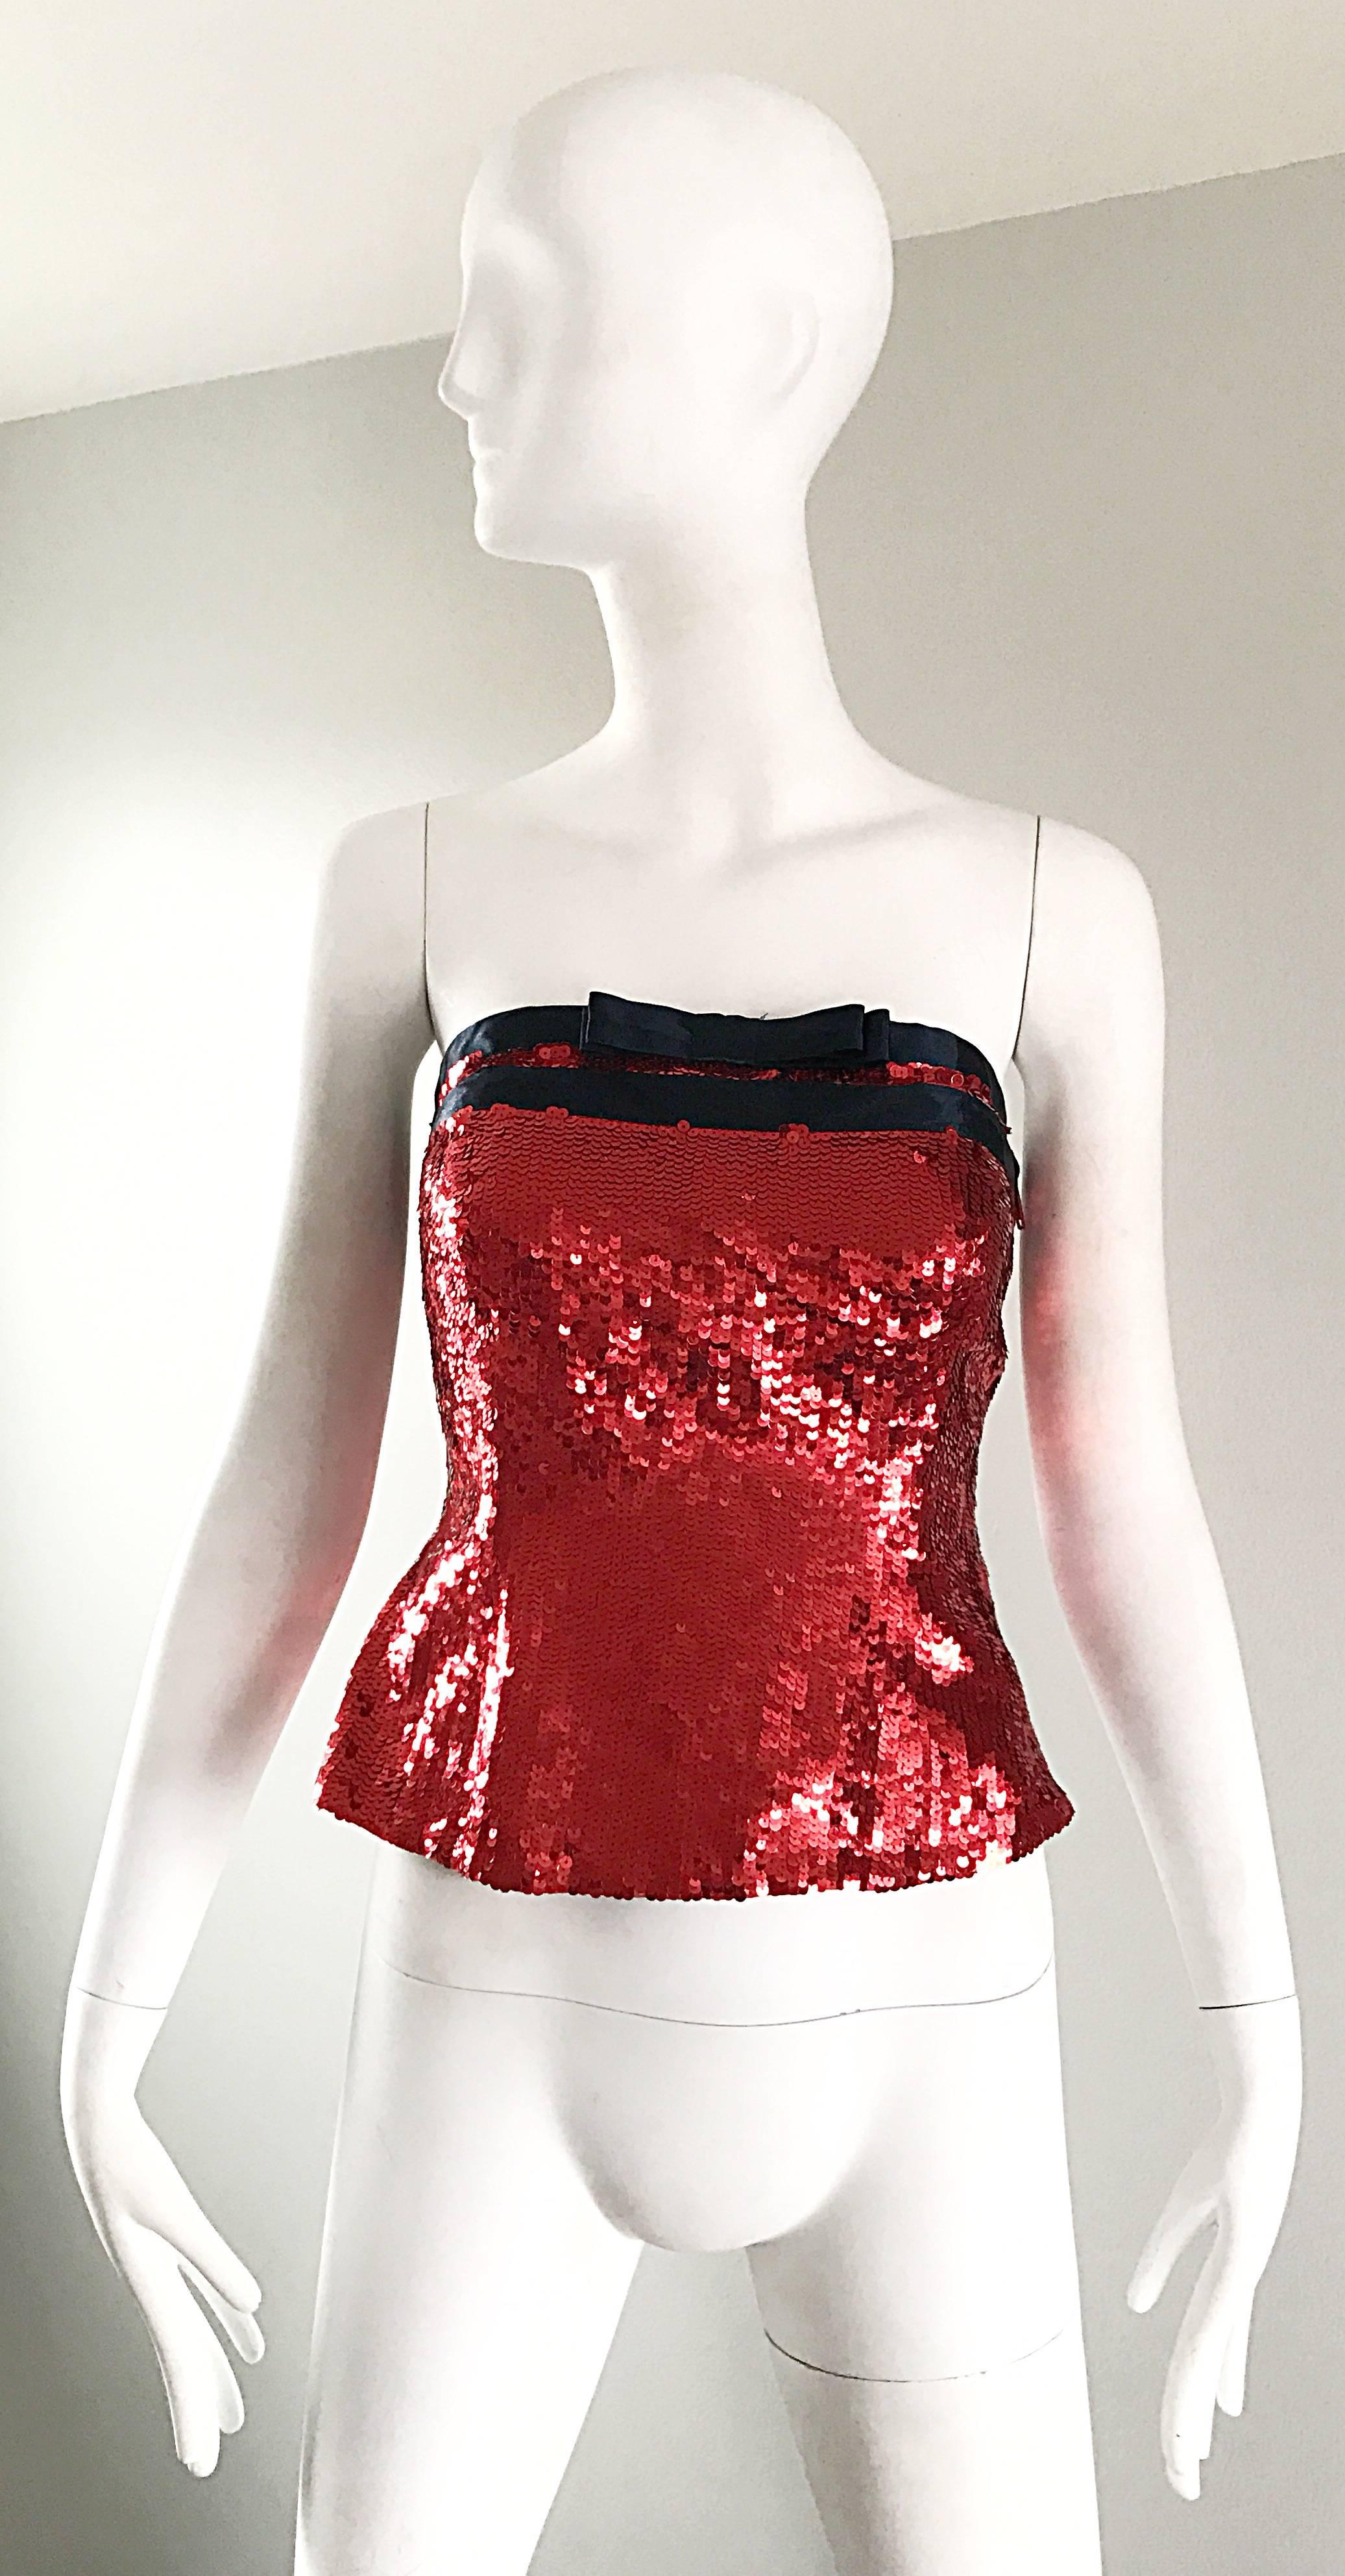 1990s  (brand new with original Neiman Marcus price tag still attached) 90s Vintage BILL BLASS red sequin strapless bustier top! Features thousands of hand-sewn sequins throughout. Two black silk satin strips of ribbon with a bow accent above center